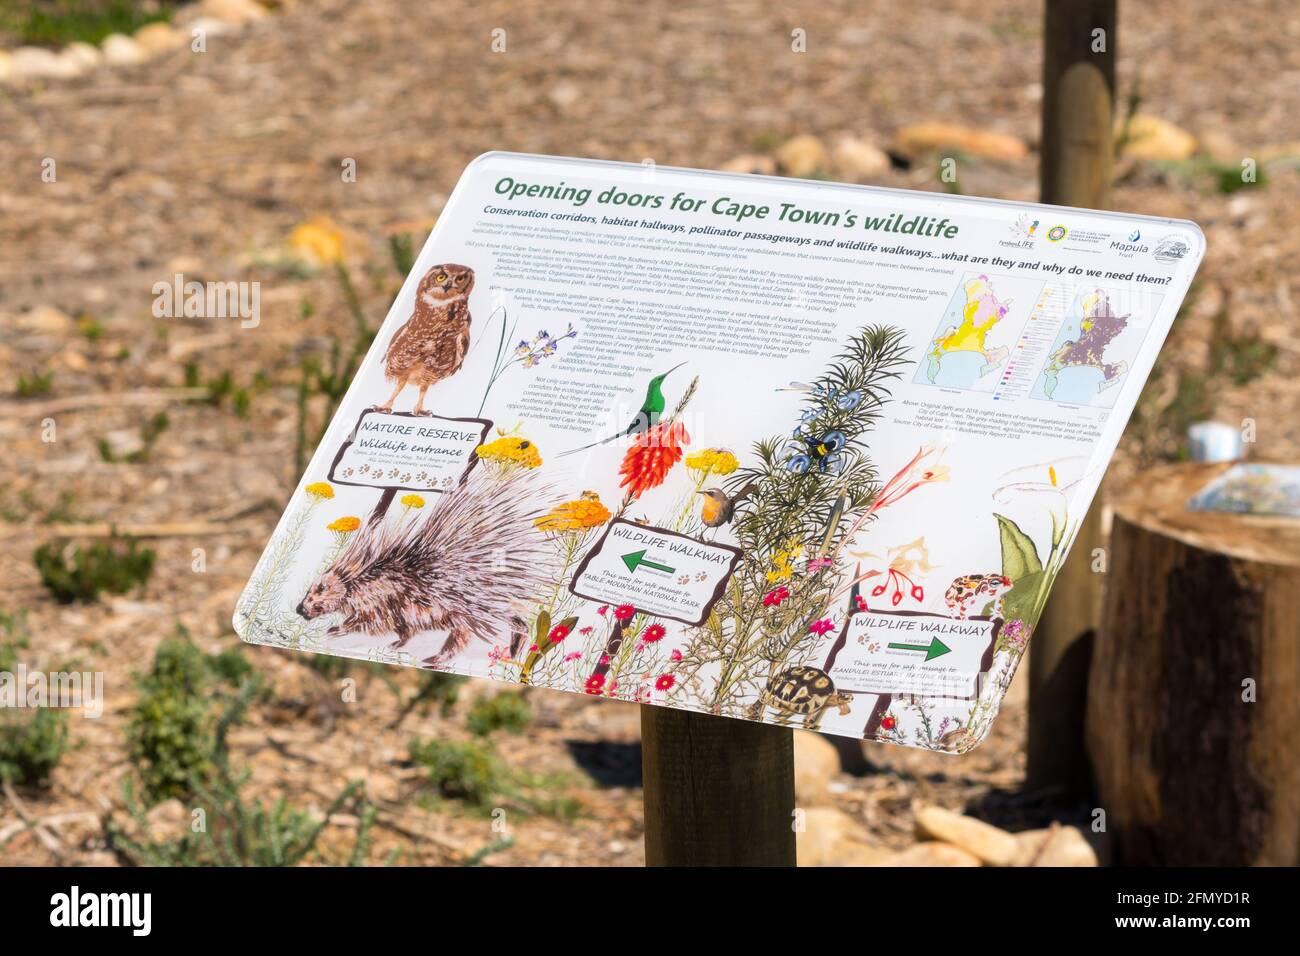 environmental awareness sign or signage for wildlife in South Africa concept education and nature awareness Stock Photo